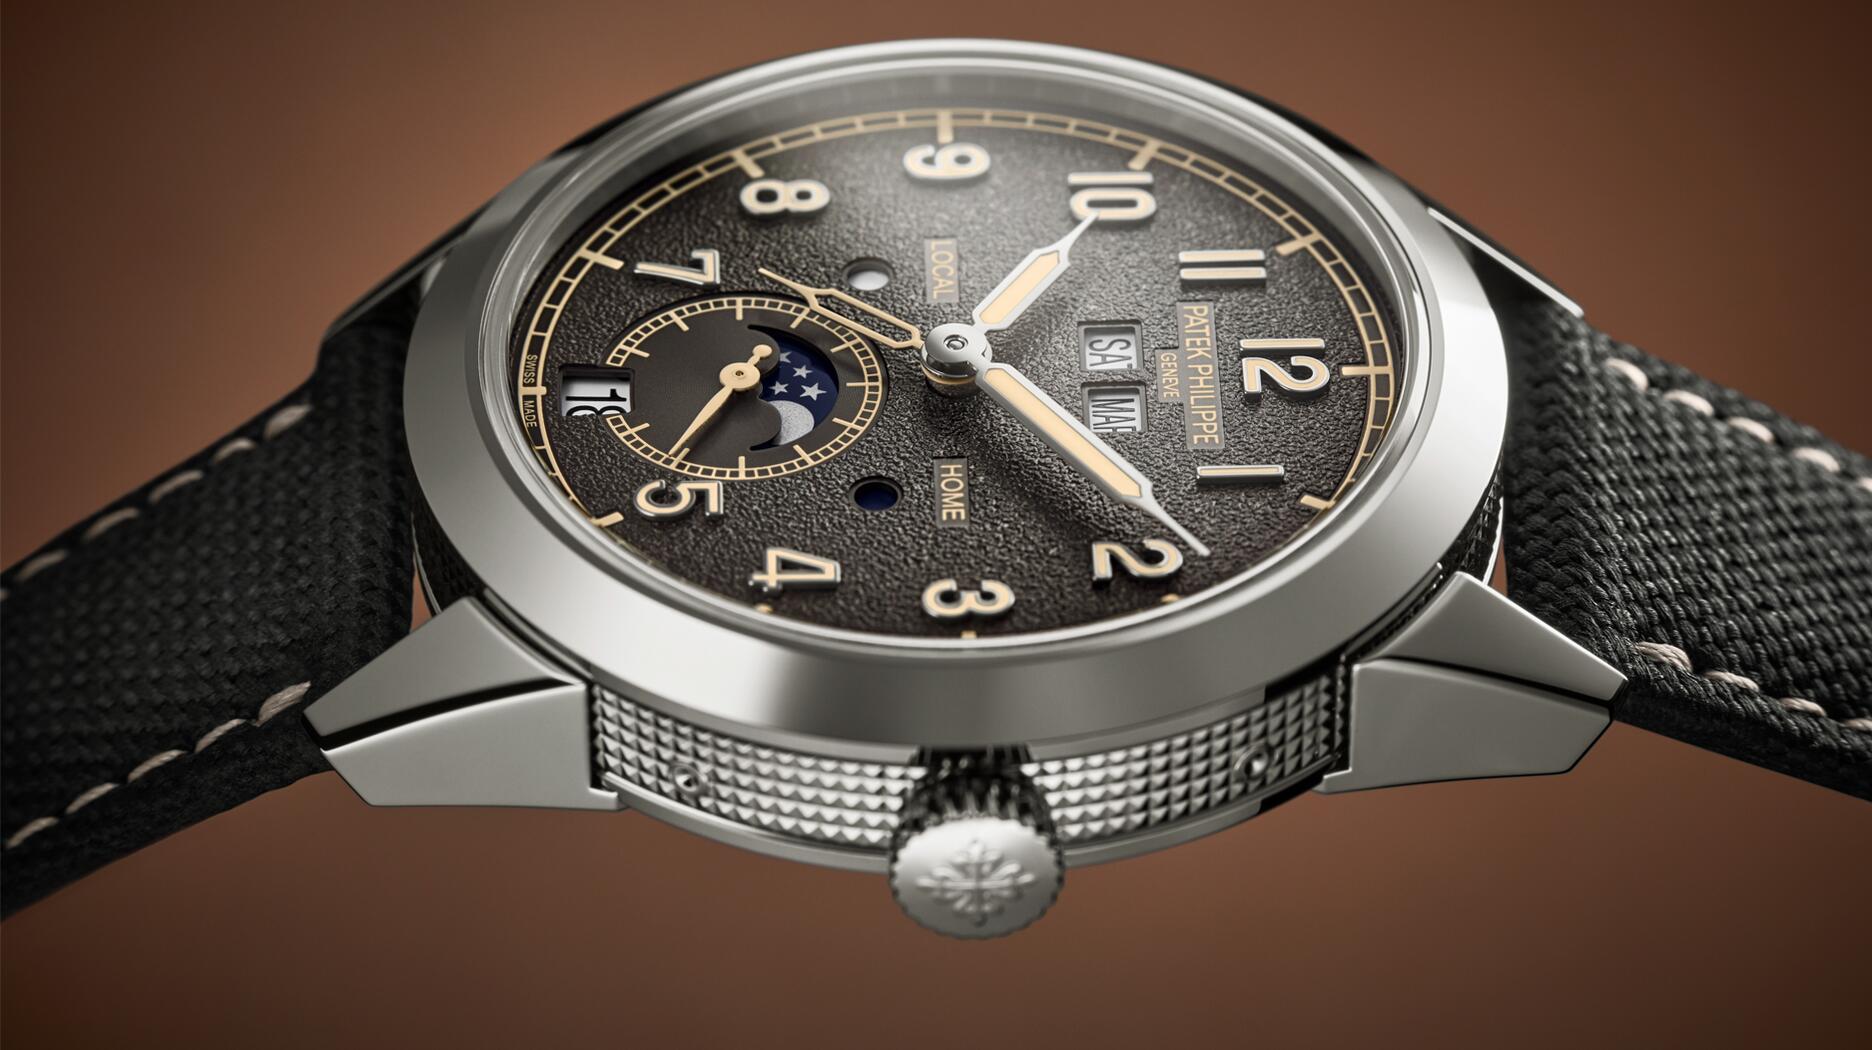 Patek Philippe Introduces Annual Calendar Travel Time Watch